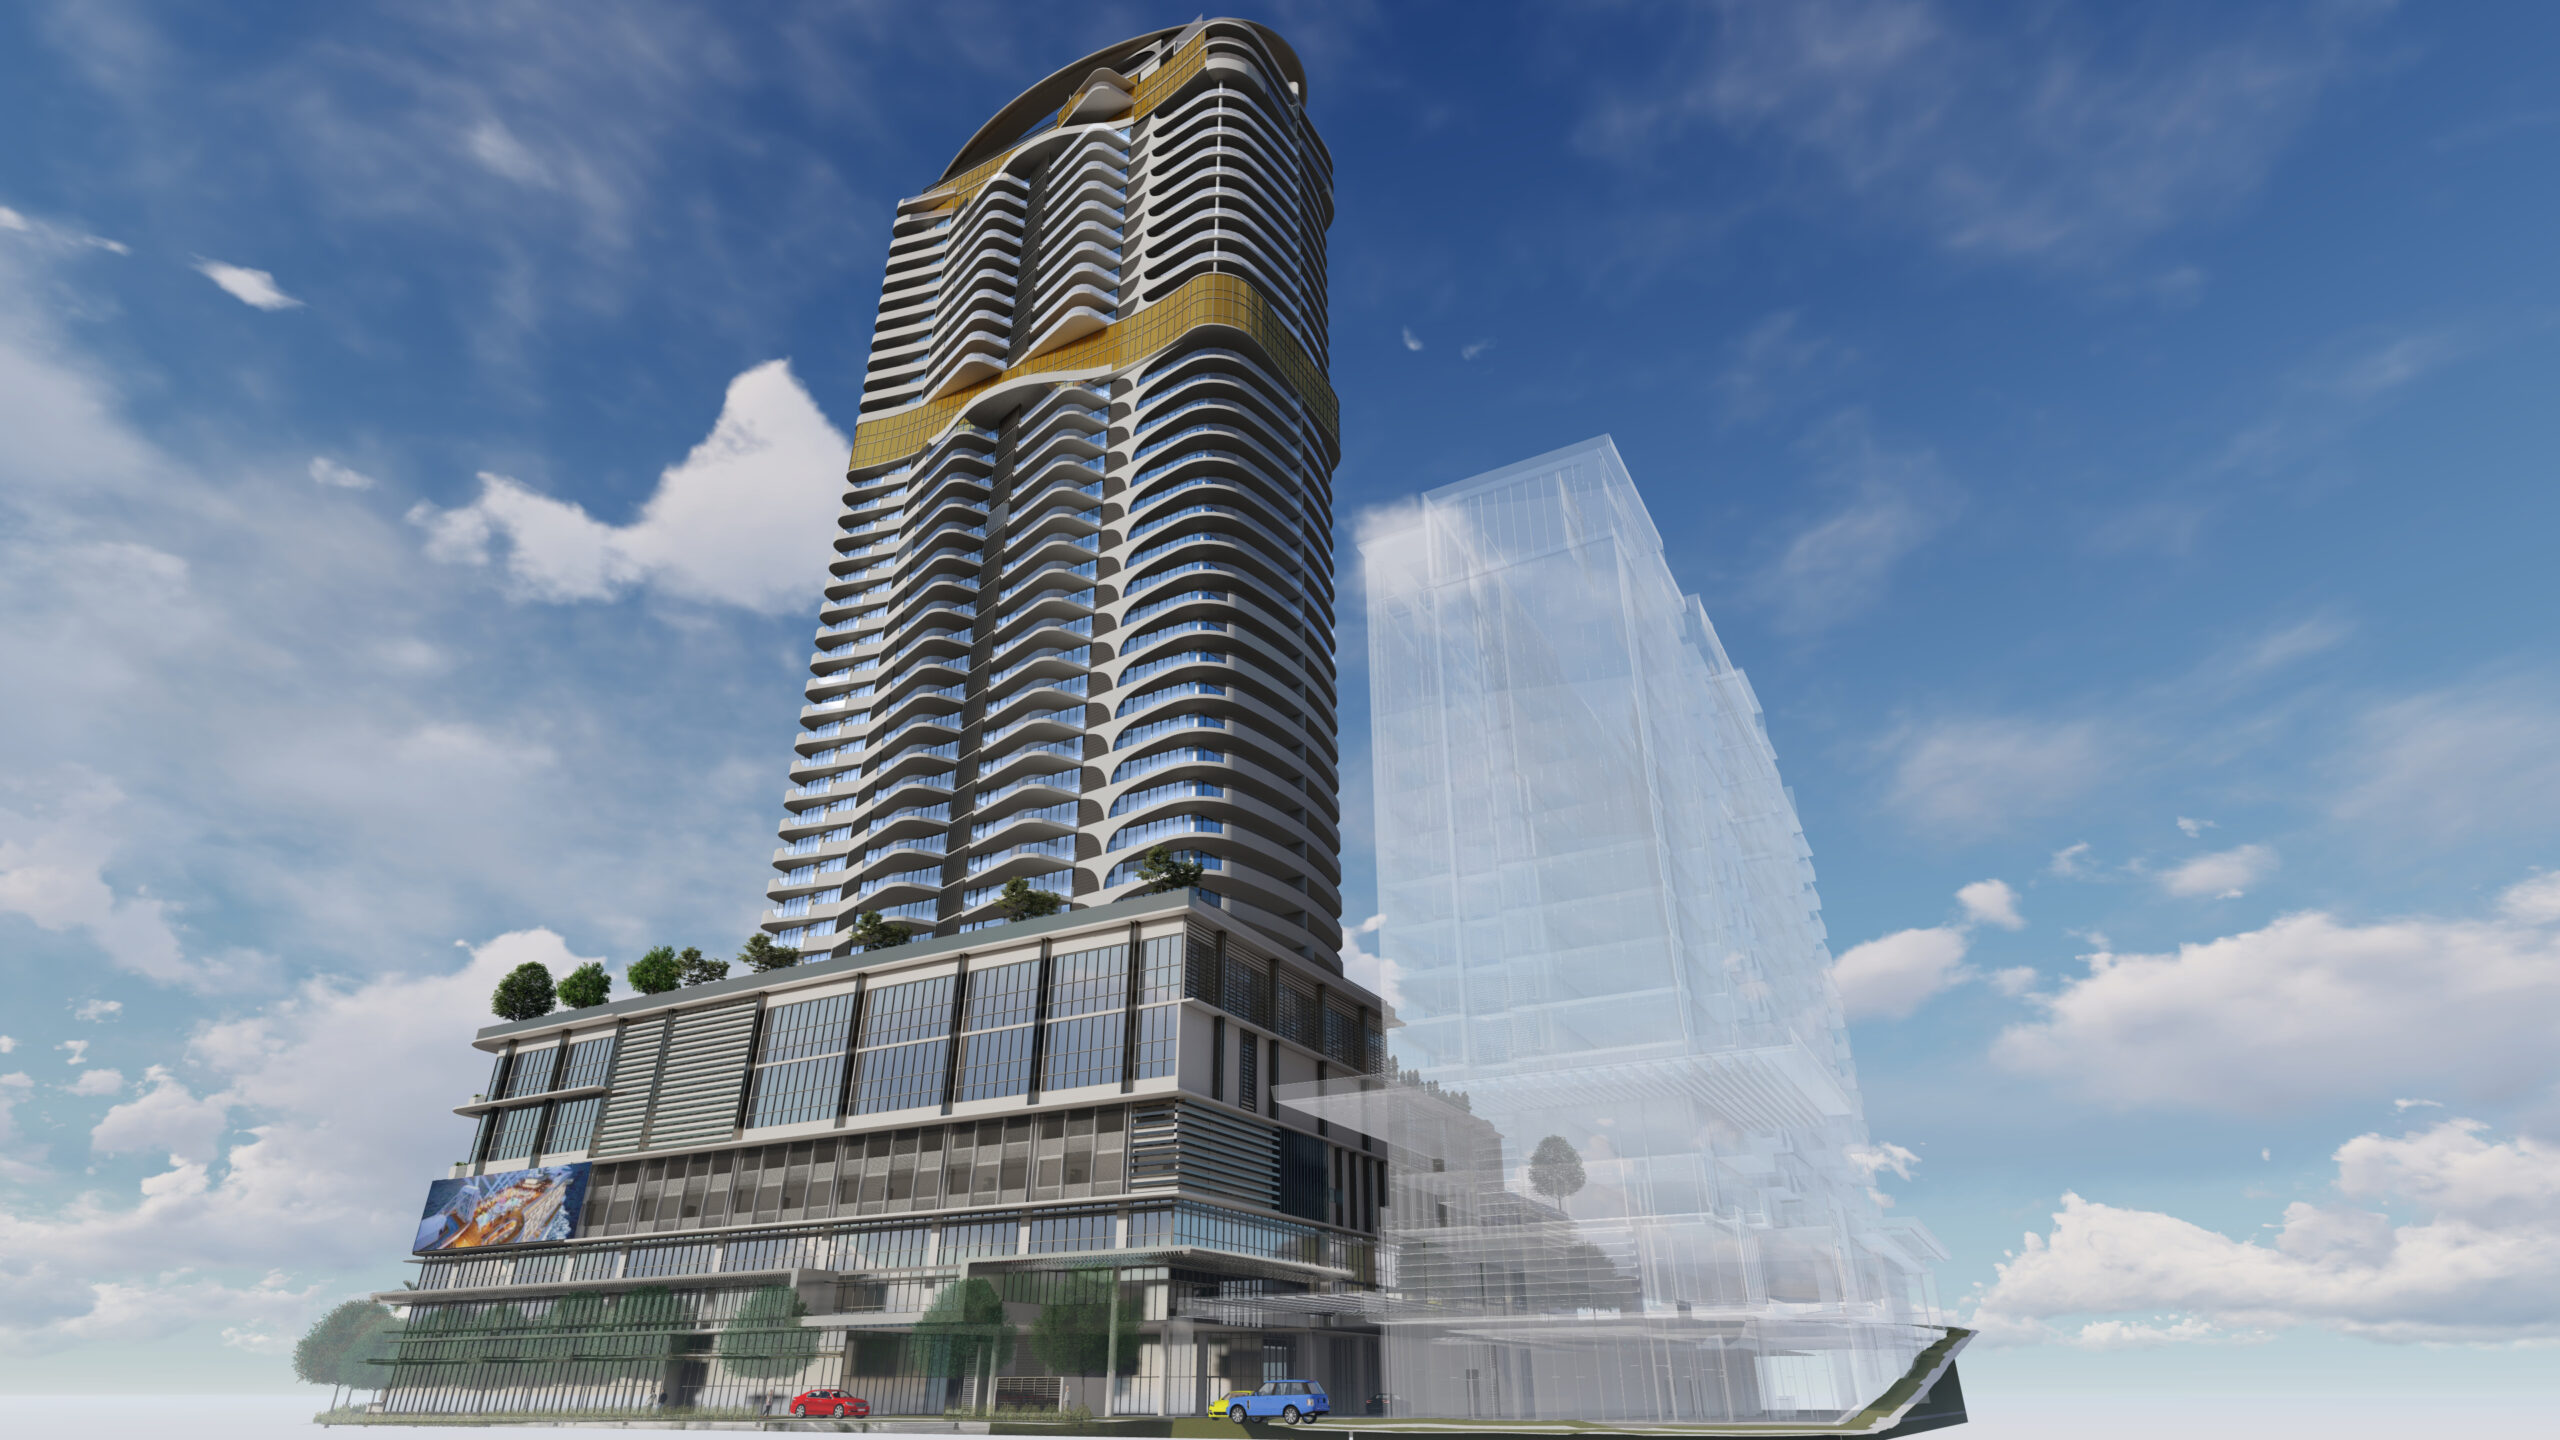 Aerial view of Monarch Place featuring a 6-story podium with integrated commercial and retail spaces, as well as aged care living spaces. The tower rises 40 stories high, adorned with gold accents and blue glazing. A floating blue halo adds a distinctive touch above the tower.